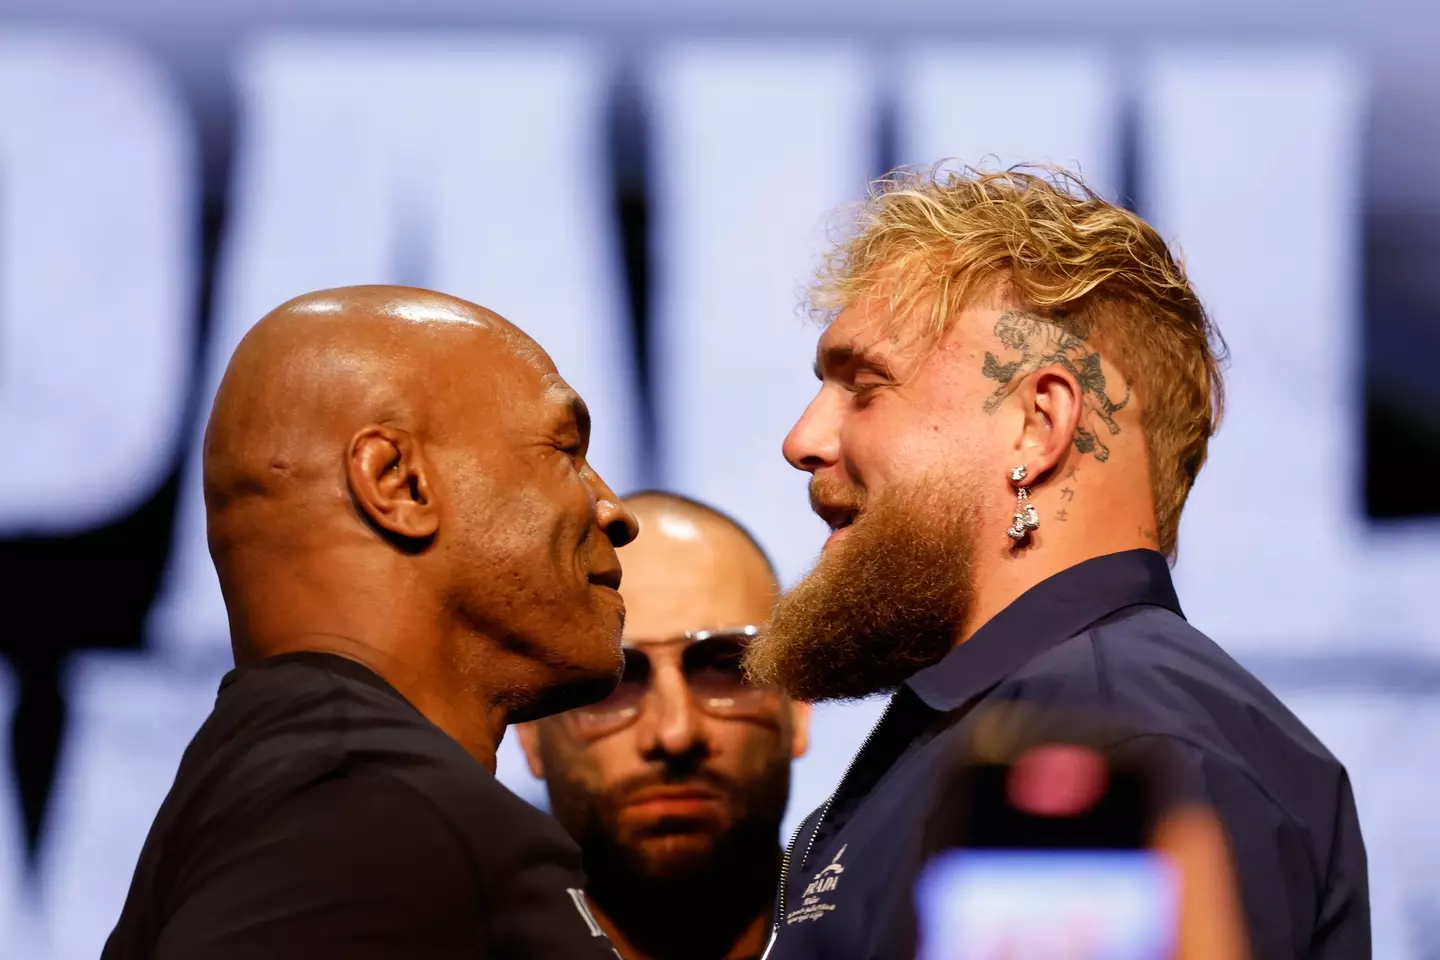 Mike Tyson and Jake Paul faced off earlier this week ahead of their highly anticipated fight. (Sarah Stier/Getty Images for Netflix)